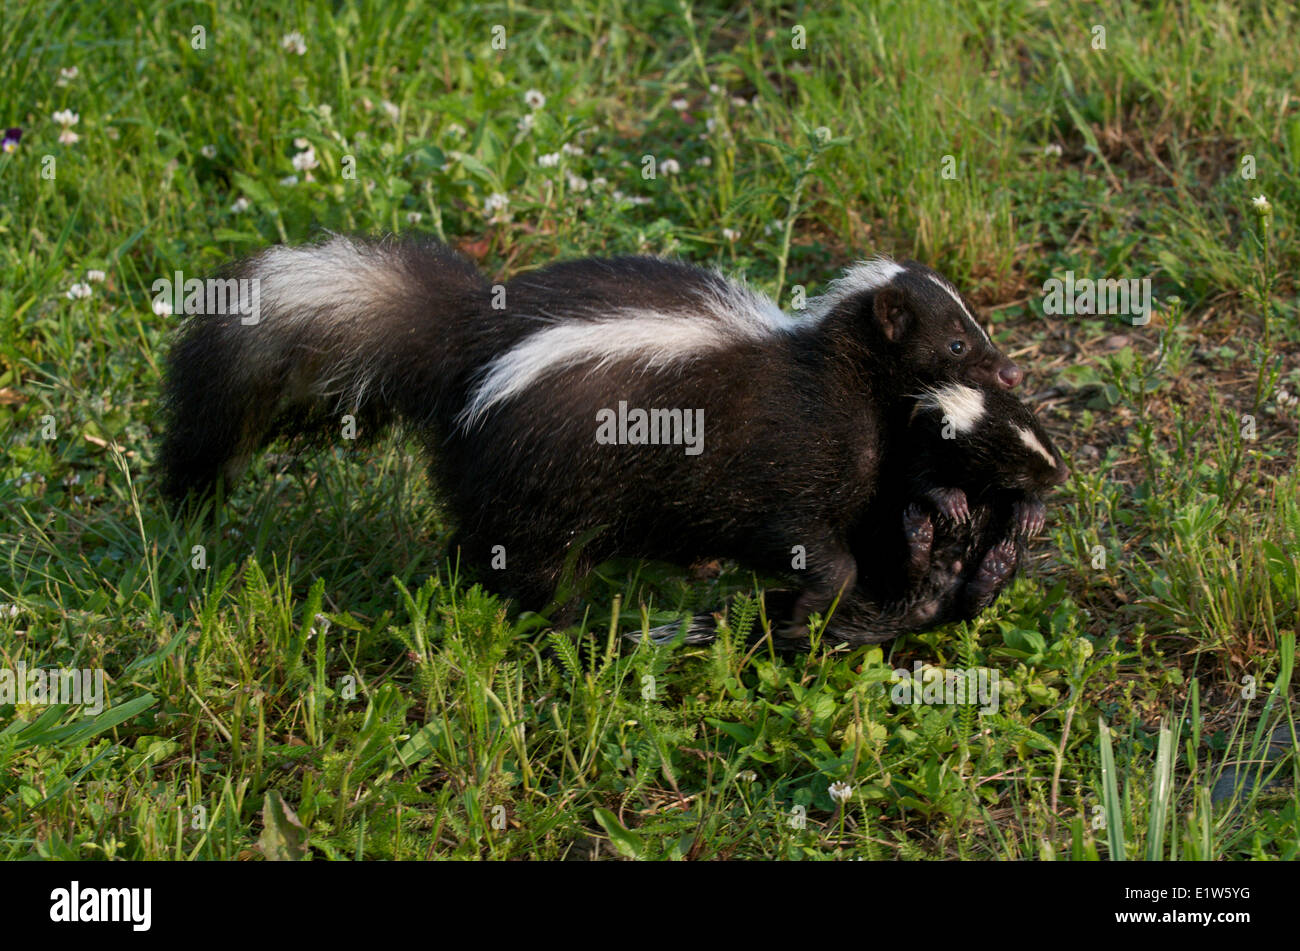 Striped skunk, Mephitis mephitis, mother carrying or moving baby skunk by the neck, Stock Photo